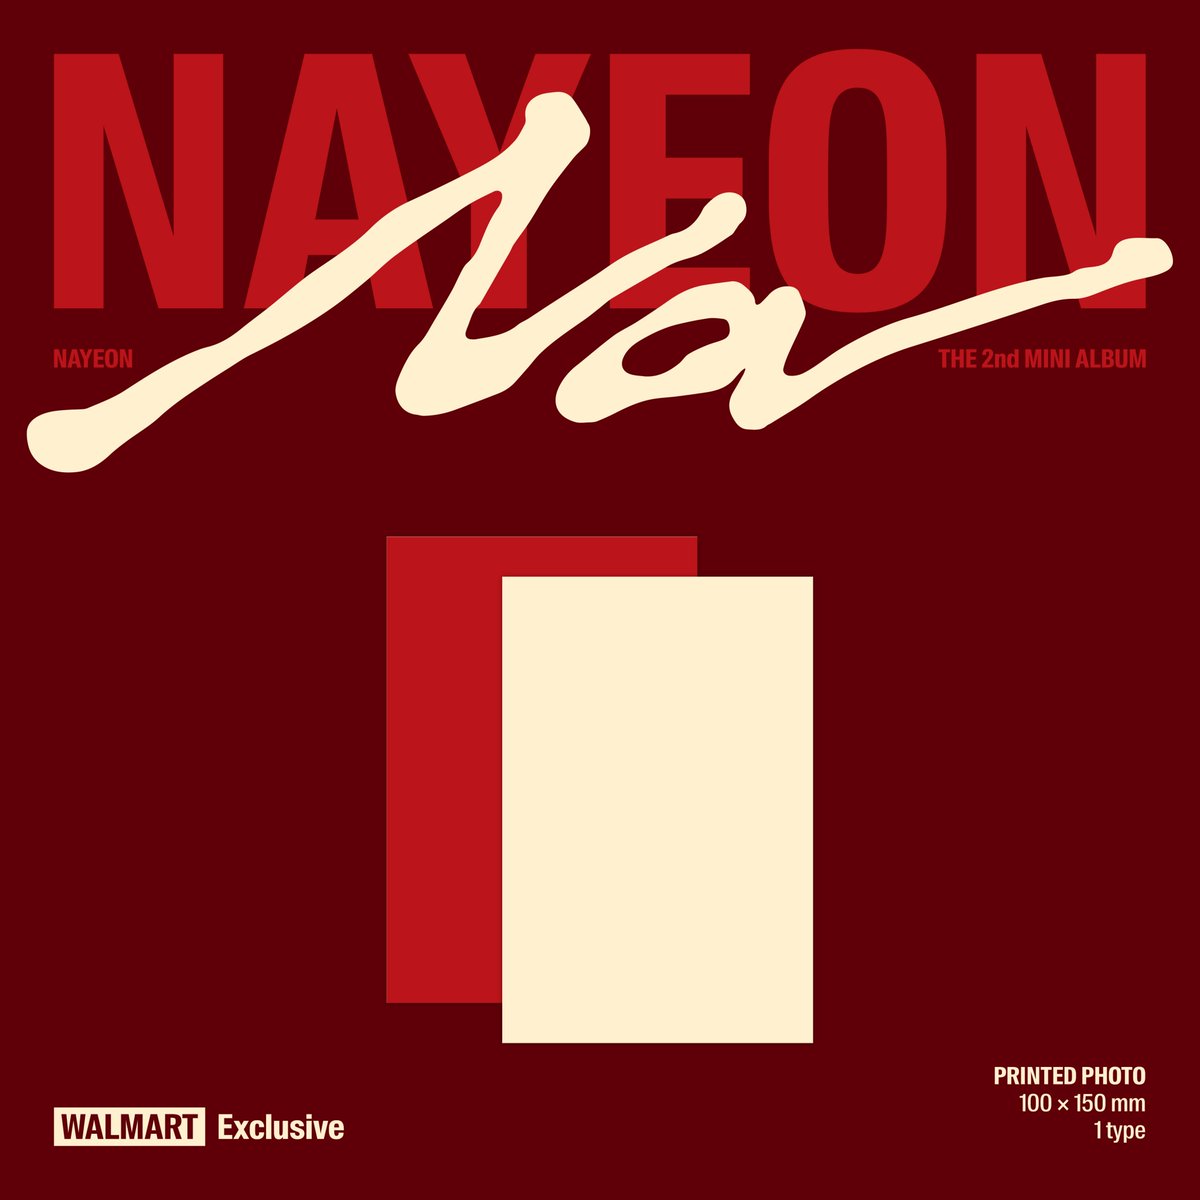 NAYEON THE 2nd MINI ALBUM 〖NA〗 🔔Physical Pre-Order 🔗Walmart (w/Exclusive Printed Photo) ‘A’ ver.: NAYEON.lnk.to/NAYEON_NA/Walm… ‘B’ ver.: NAYEON.lnk.to/NAYEON_NA/Walm… ‘C’ ver.: NAYEON.lnk.to/NAYEON_NA/Walm… ✰ 〖NA〗 Pre-Save & Pre-Order ✰ NAYEON.lnk.to/NAYEON_NA ➮ Release on